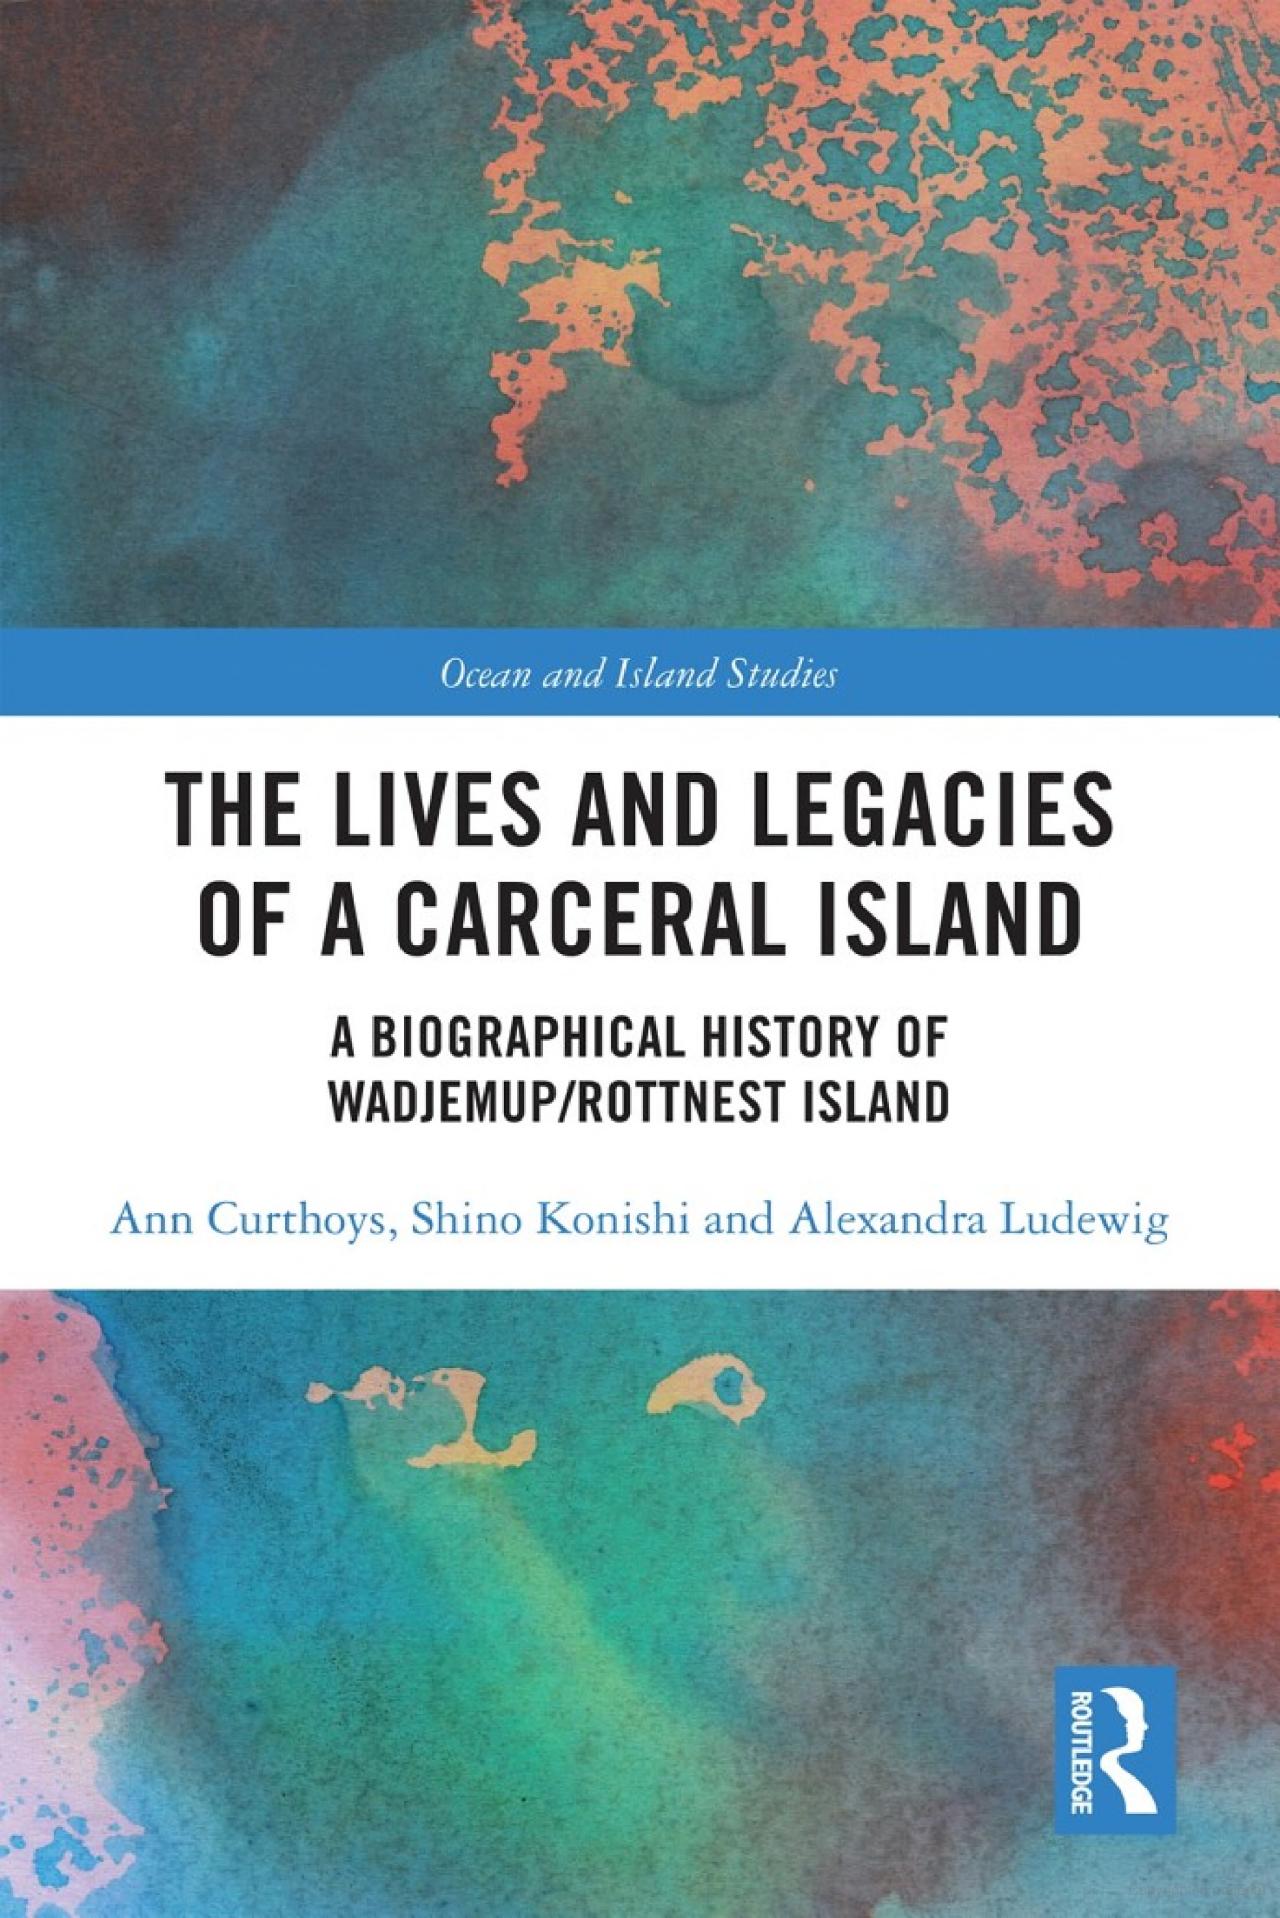 The Lives and Legacies of a Carceral Island: A biographical history of Wadjemup/Rottnest Island